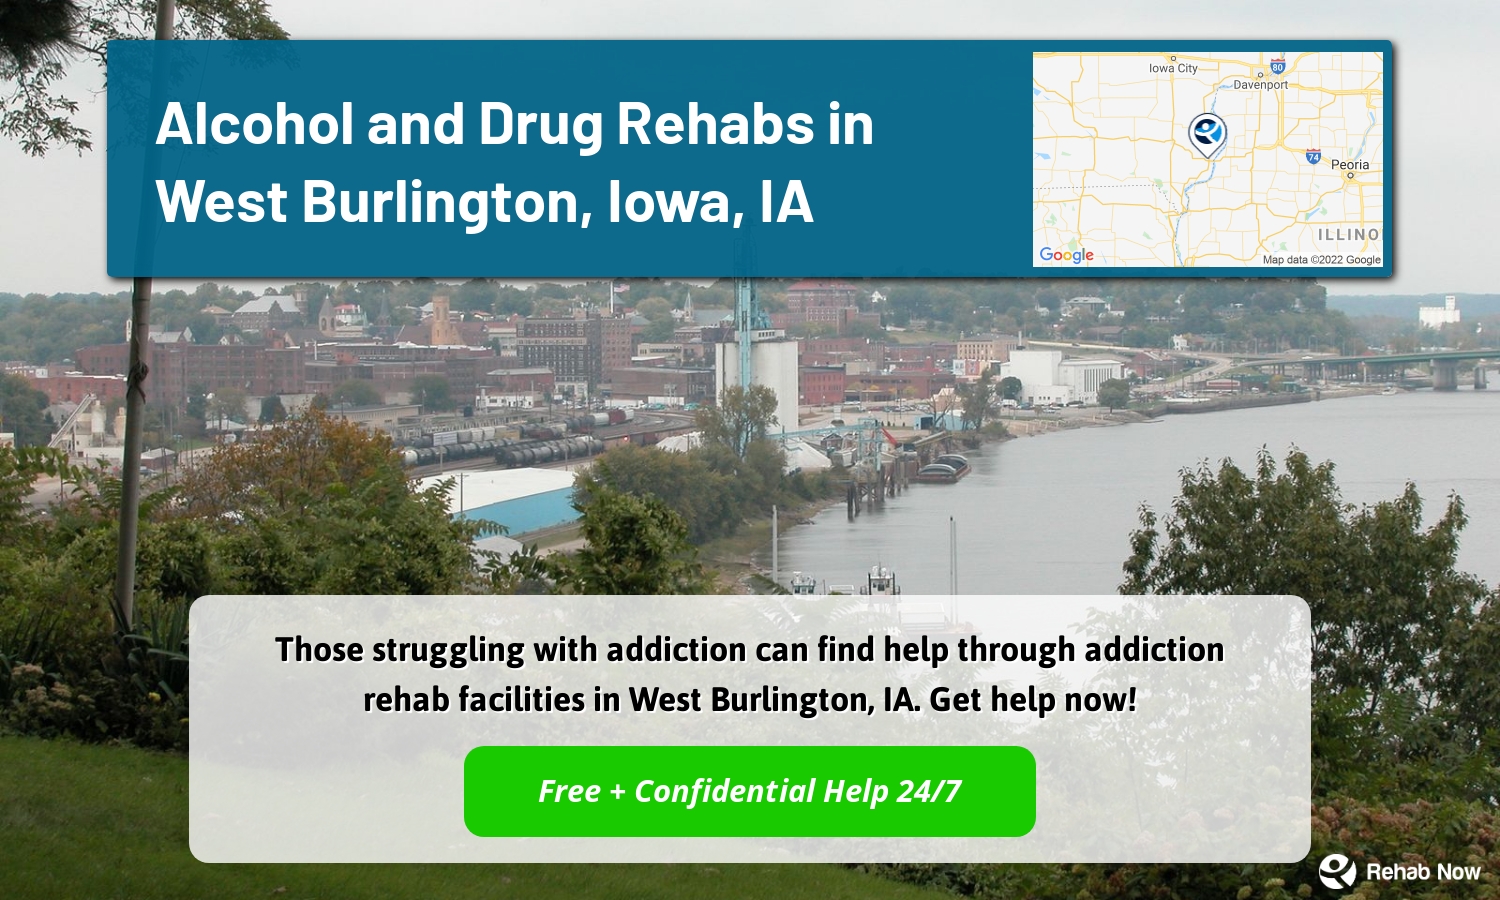 Those struggling with addiction can find help through addiction rehab facilities in West Burlington, IA. Get help now!